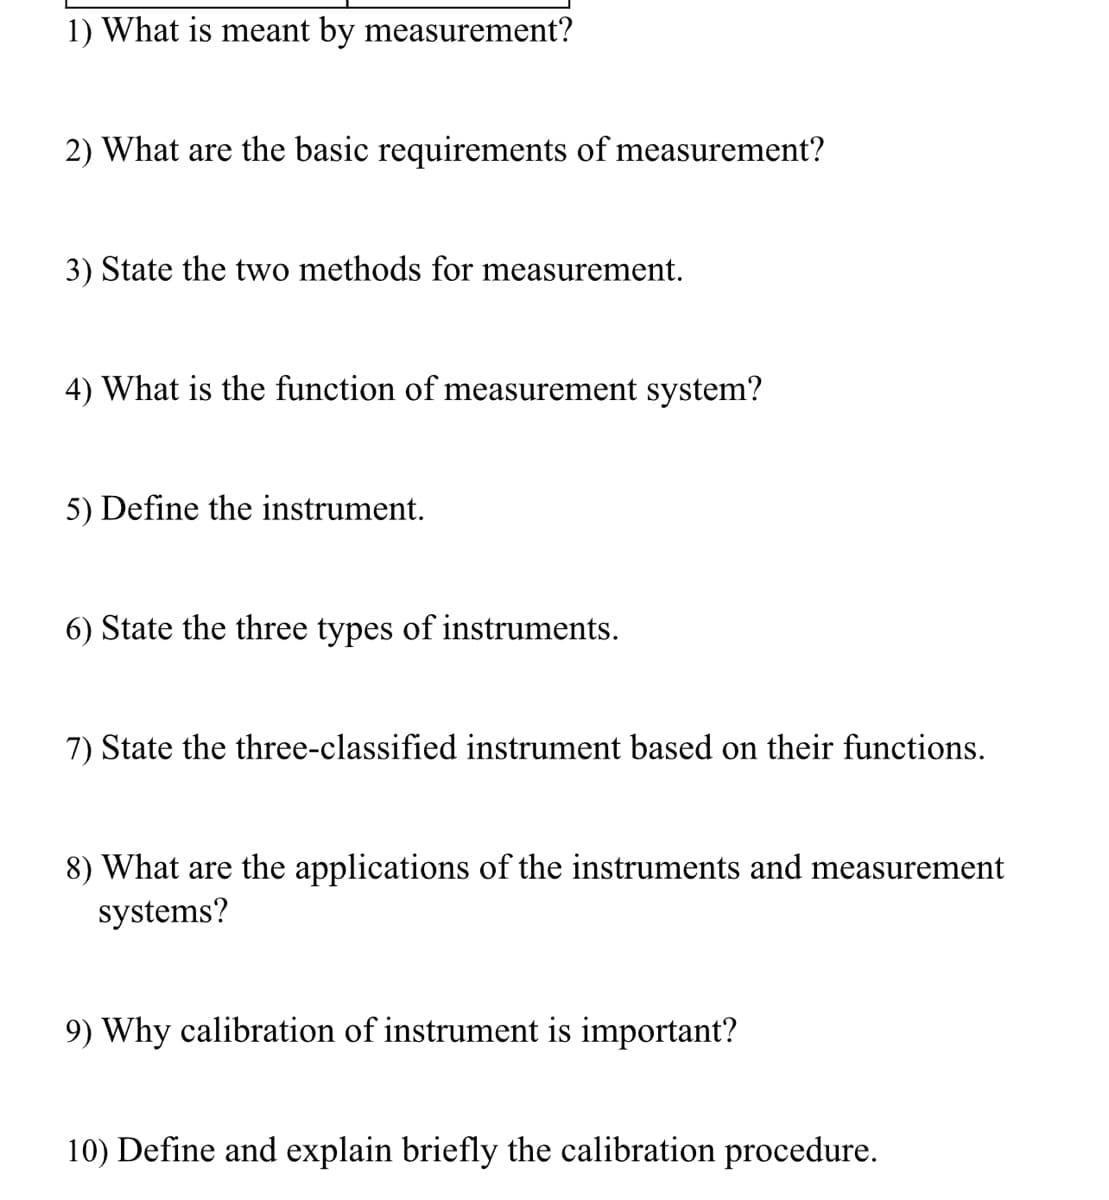 1) What is meant by measurement?
2) What are the basic requirements of measurement?
3) State the two methods for measurement.
4) What is the function of measurement system?
5) Define the instrument.
6) State the three types of instruments.
7) State the three-classified instrument based on their functions.
8) What are the applications of the instruments and measurement
systems?
9) Why calibration of instrument is important?
10) Define and explain briefly the calibration procedure.
